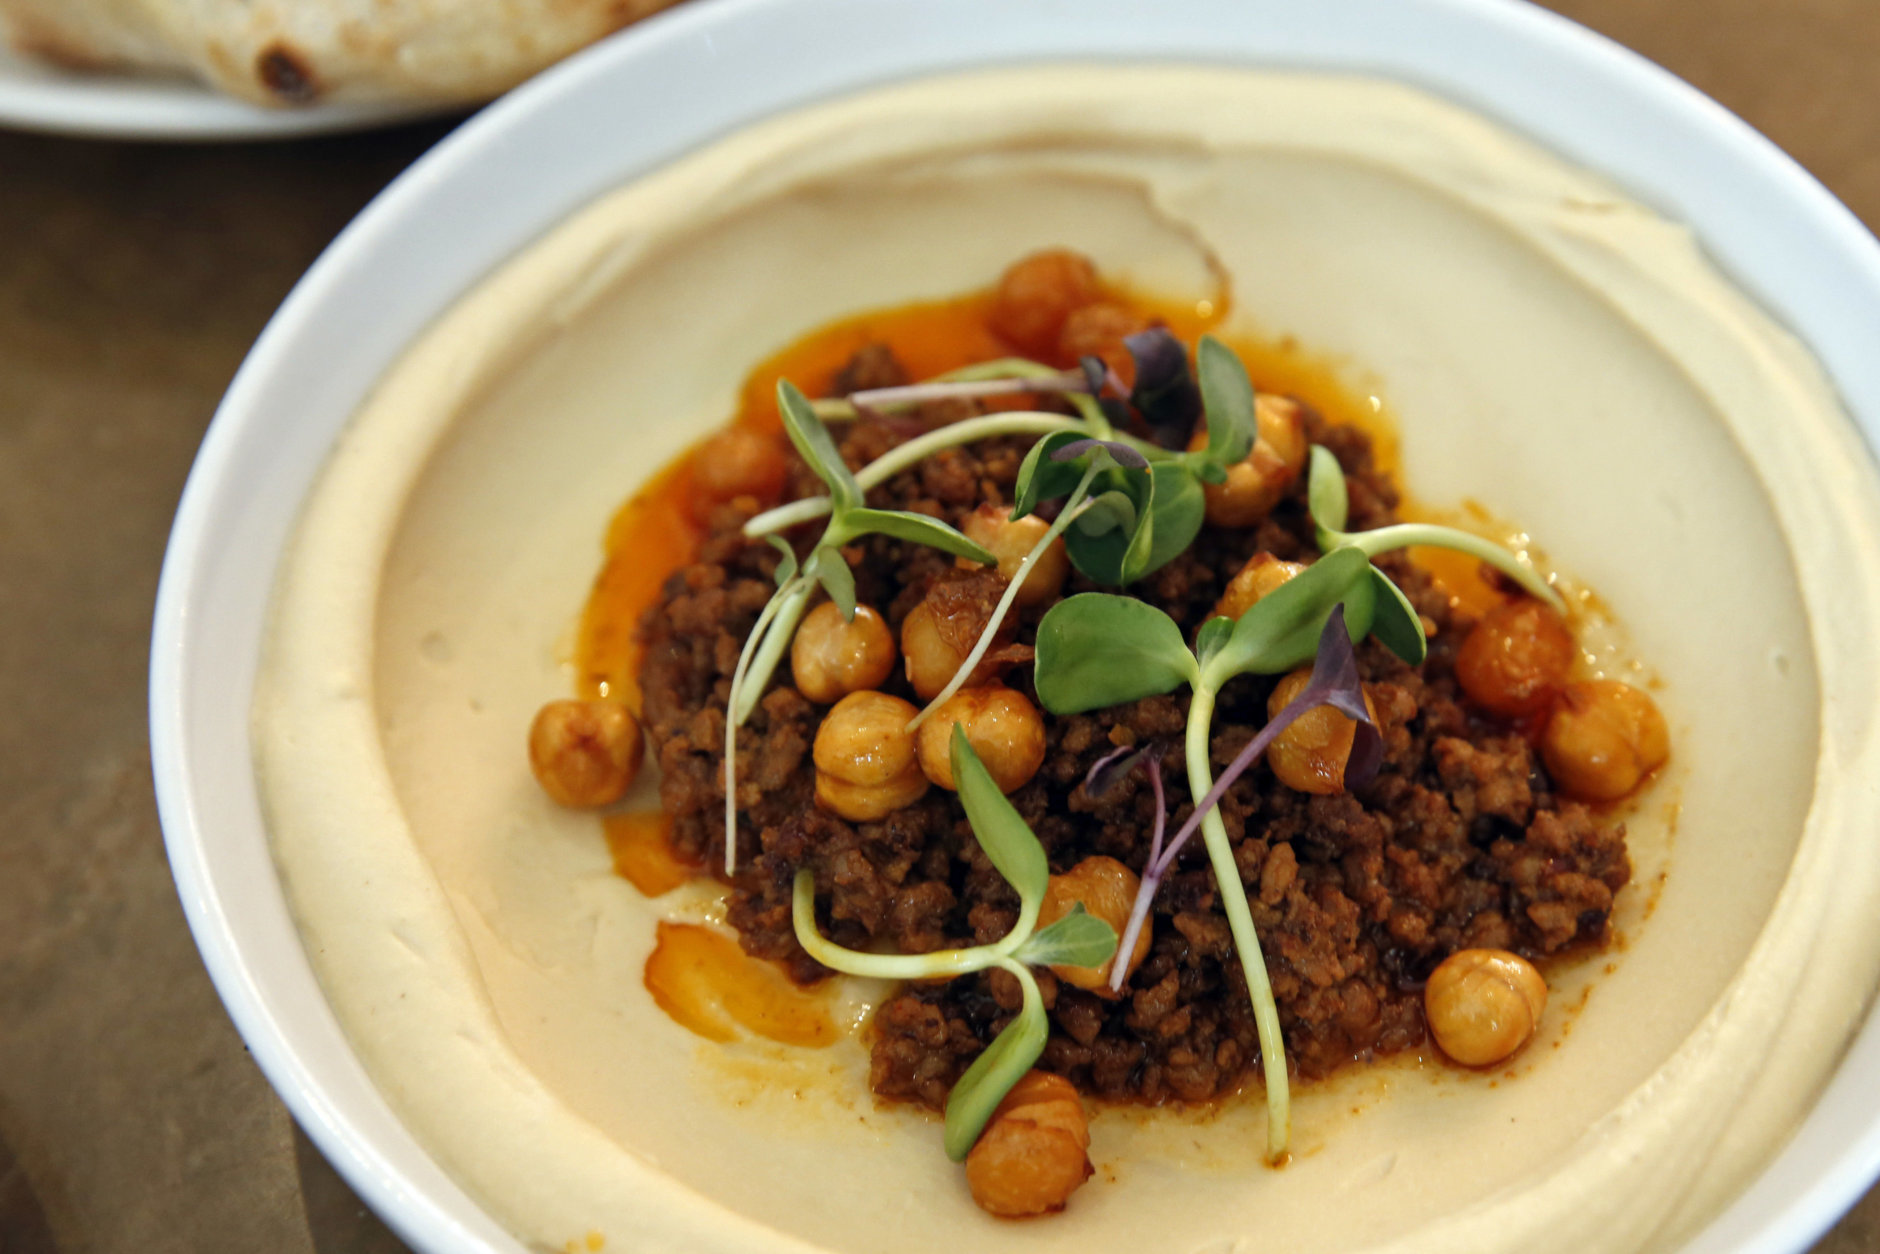 In this Tuesday, May 31, 2016 photo, lamb ragu hummus with crispy chickpeas, sits on a table at Shaya Restaurant, in New Orleans. In 2015, Shaya opened his namesake restaurant, a bustling Israeli eatery on chic Magazine Street that the James Beard Foundation in May named the Best New Restaurant in the U.S. In 2015, Shaya opened his namesake restaurant, a bustling Israeli eatery on chic Magazine Street that the James Beard Foundation in May named the Best New Restaurant in the U.S. (AP Photo/Gerald Herbert)